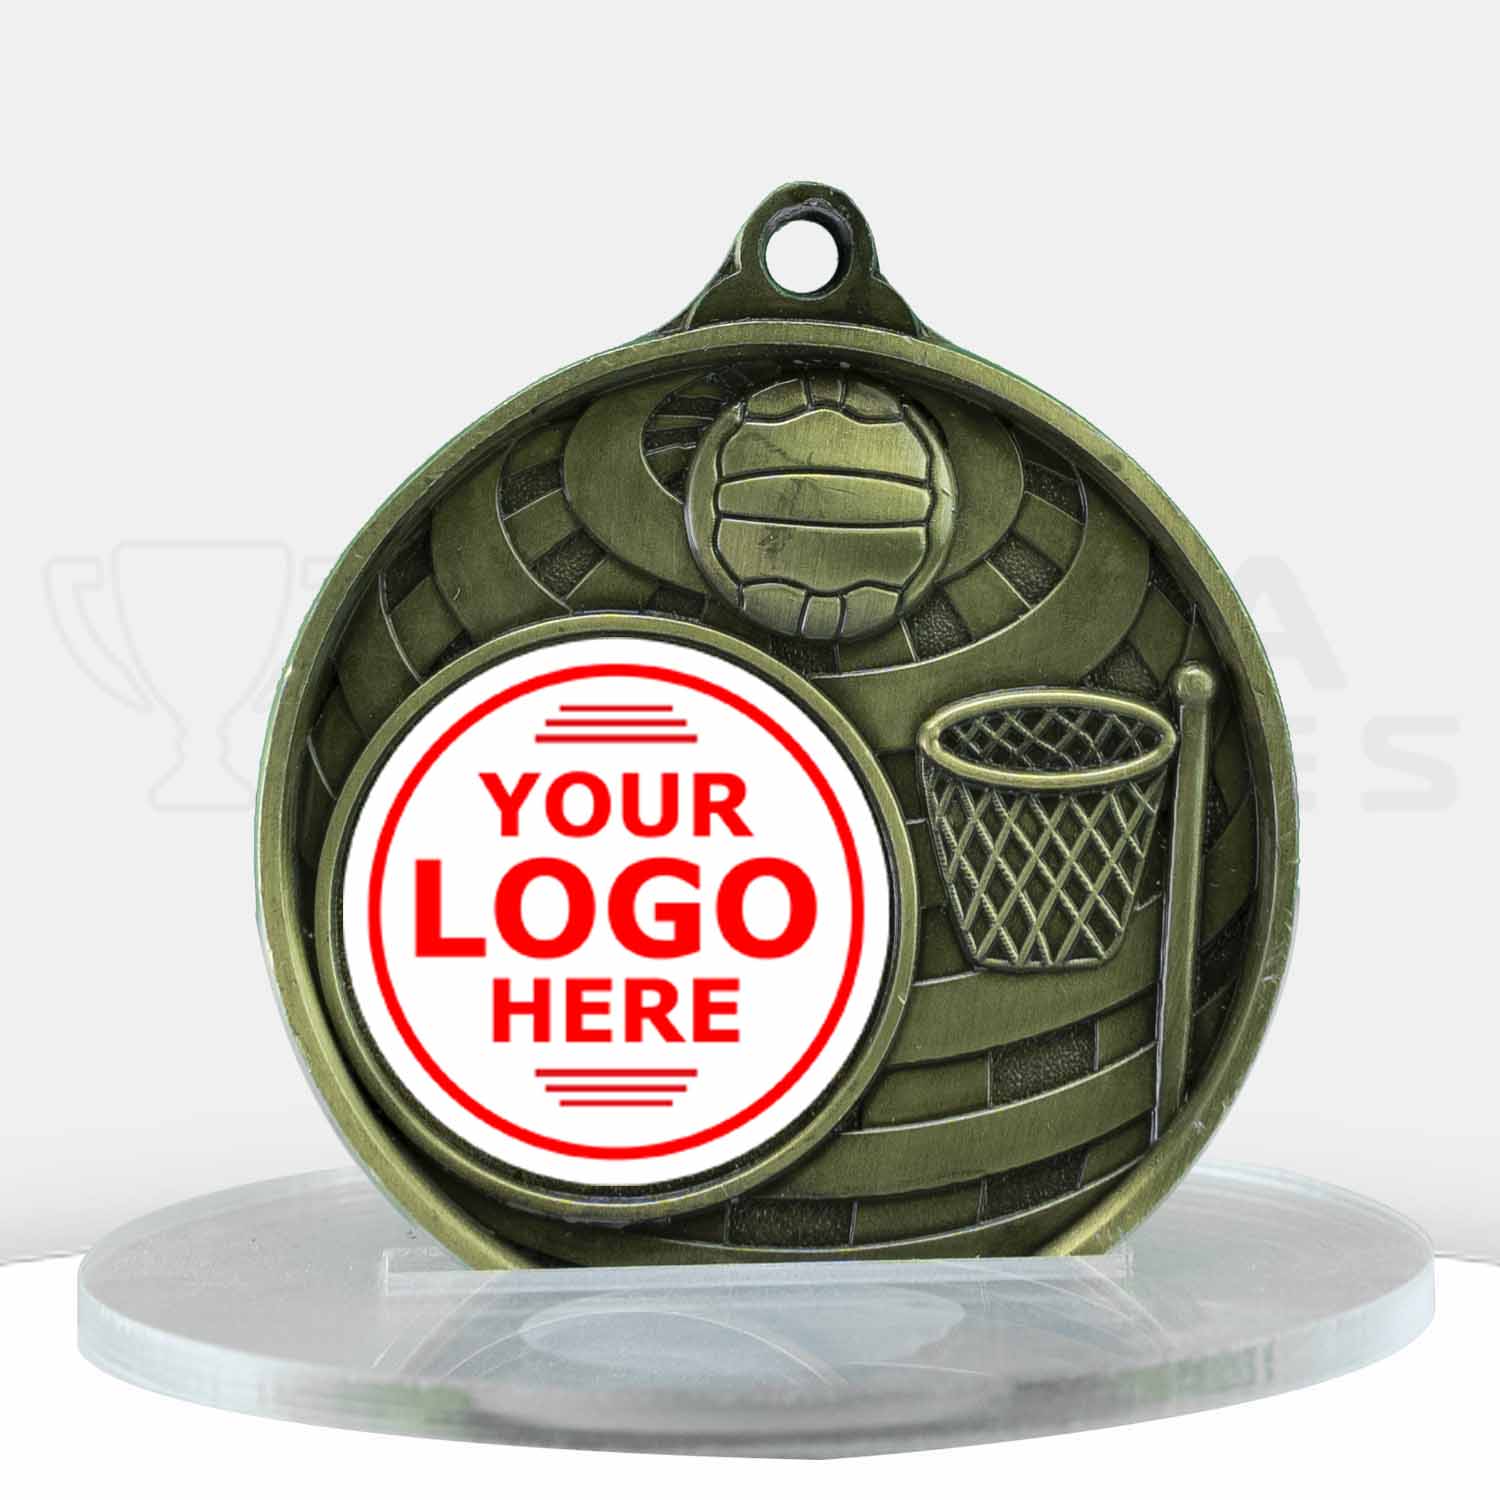 global-netball-logo-medal-1073c-8g-front-with-logo